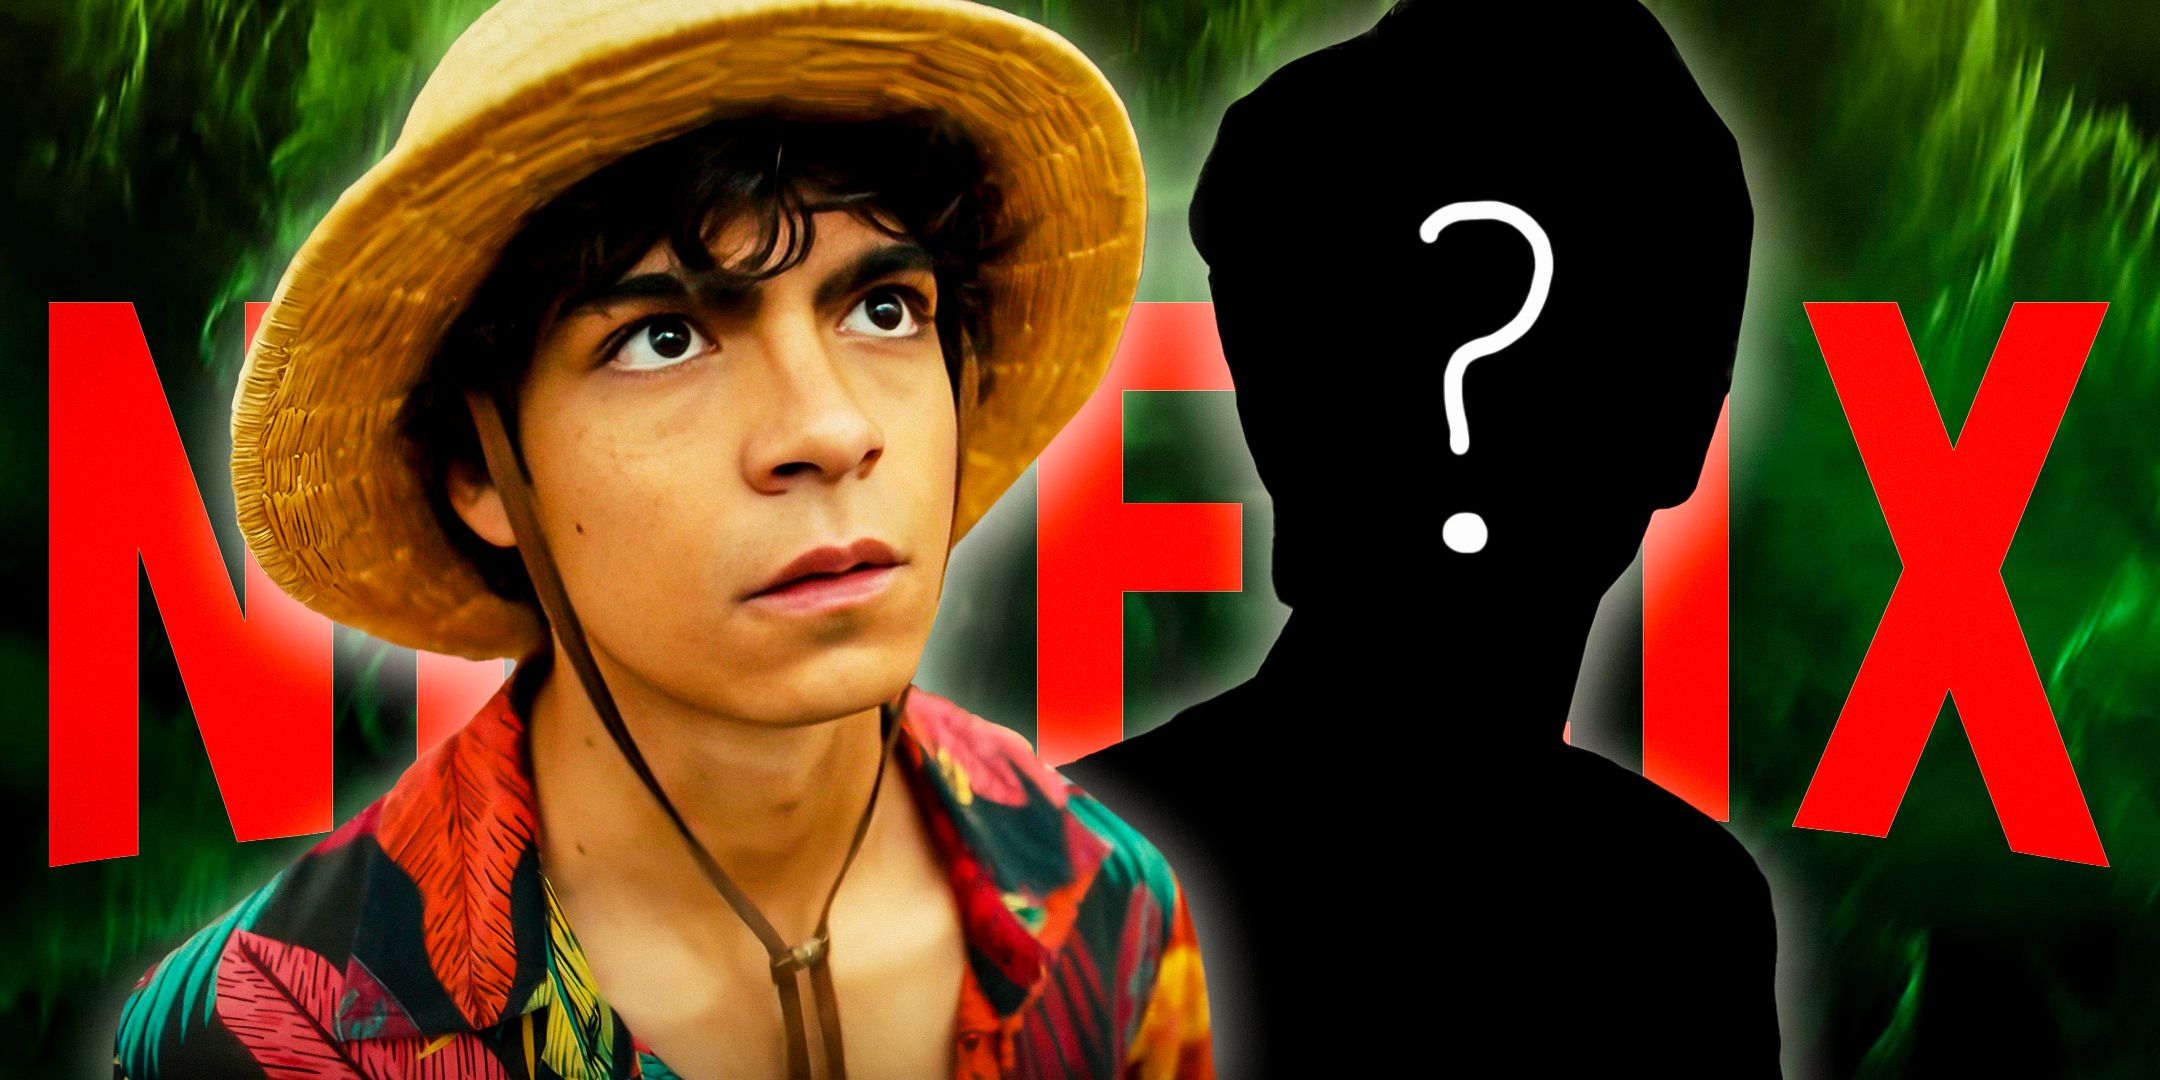 Iñaki Godoy as Monkey D. Luffy looking awed from Netflix's live-action One Piece with a mystery figure behind him